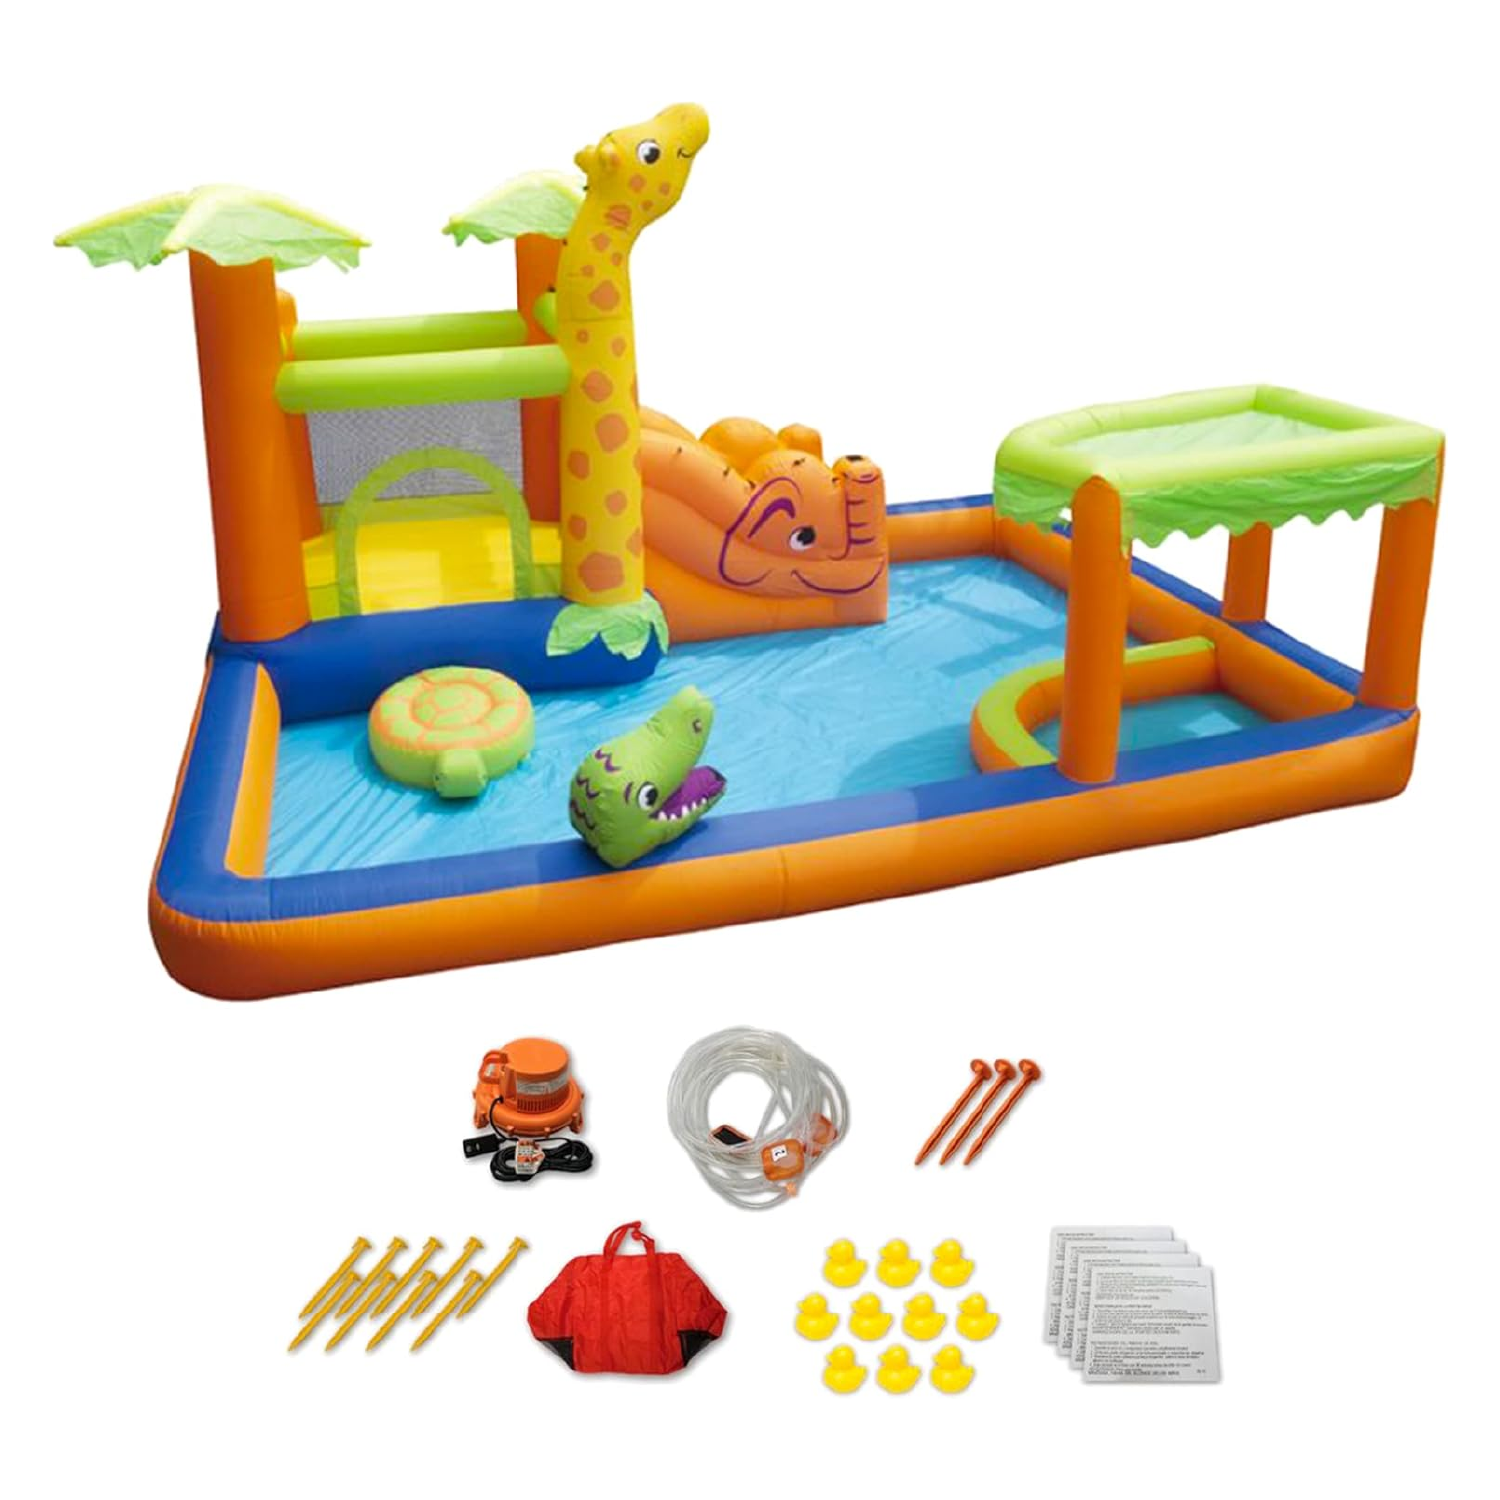 Banzai Safari Splash Water Park Inflatable Bouncer with Cannon and Blower - image 1 of 12